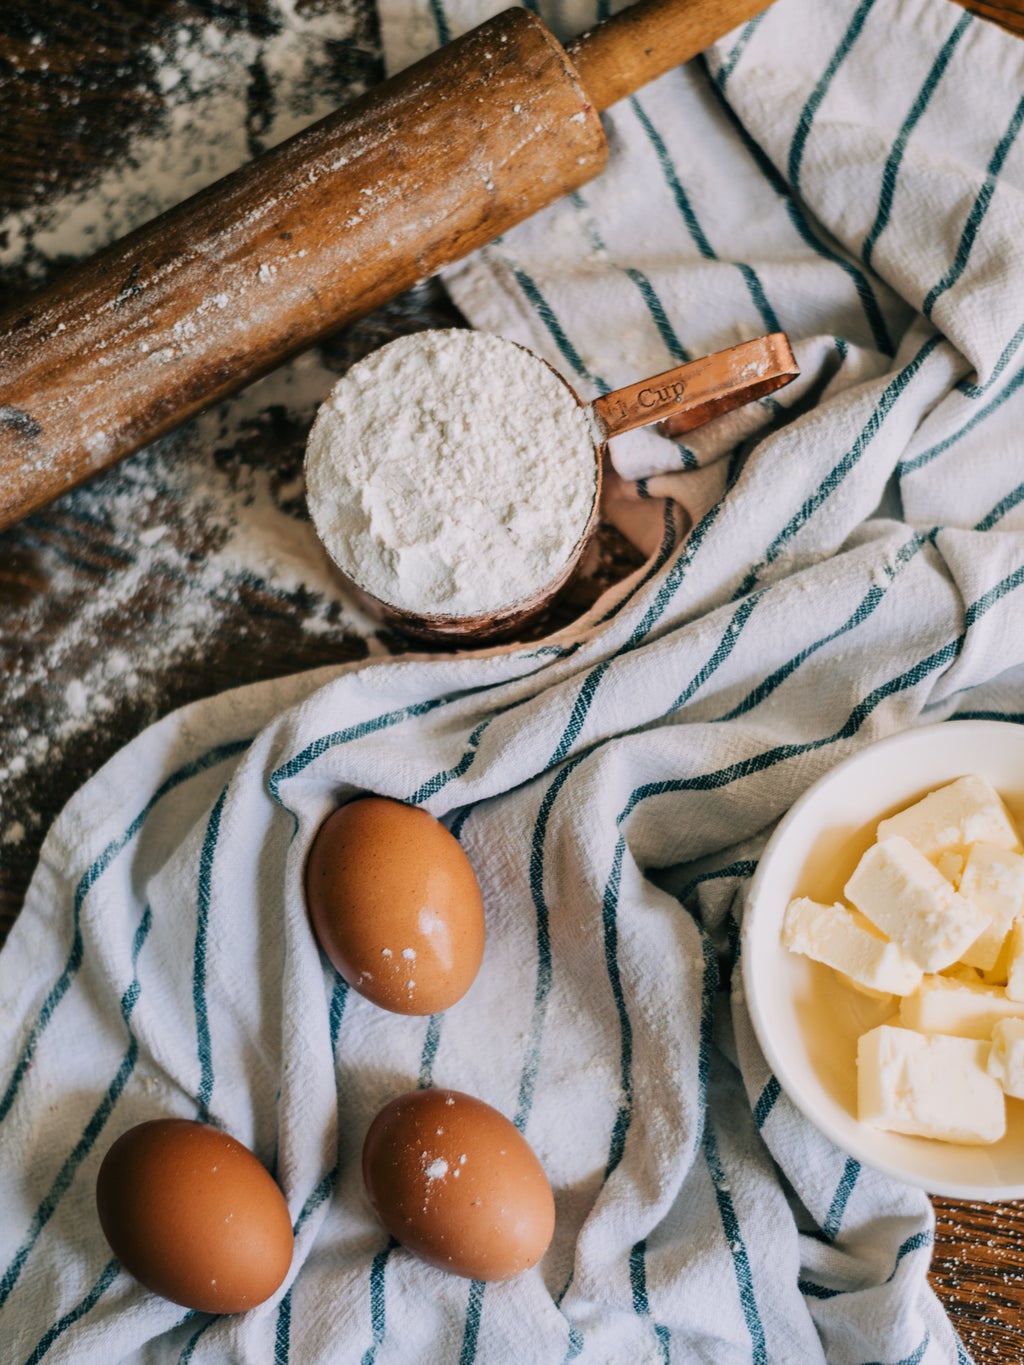 Brown eggs, butter in a bowl, and flour on a striped dish towel